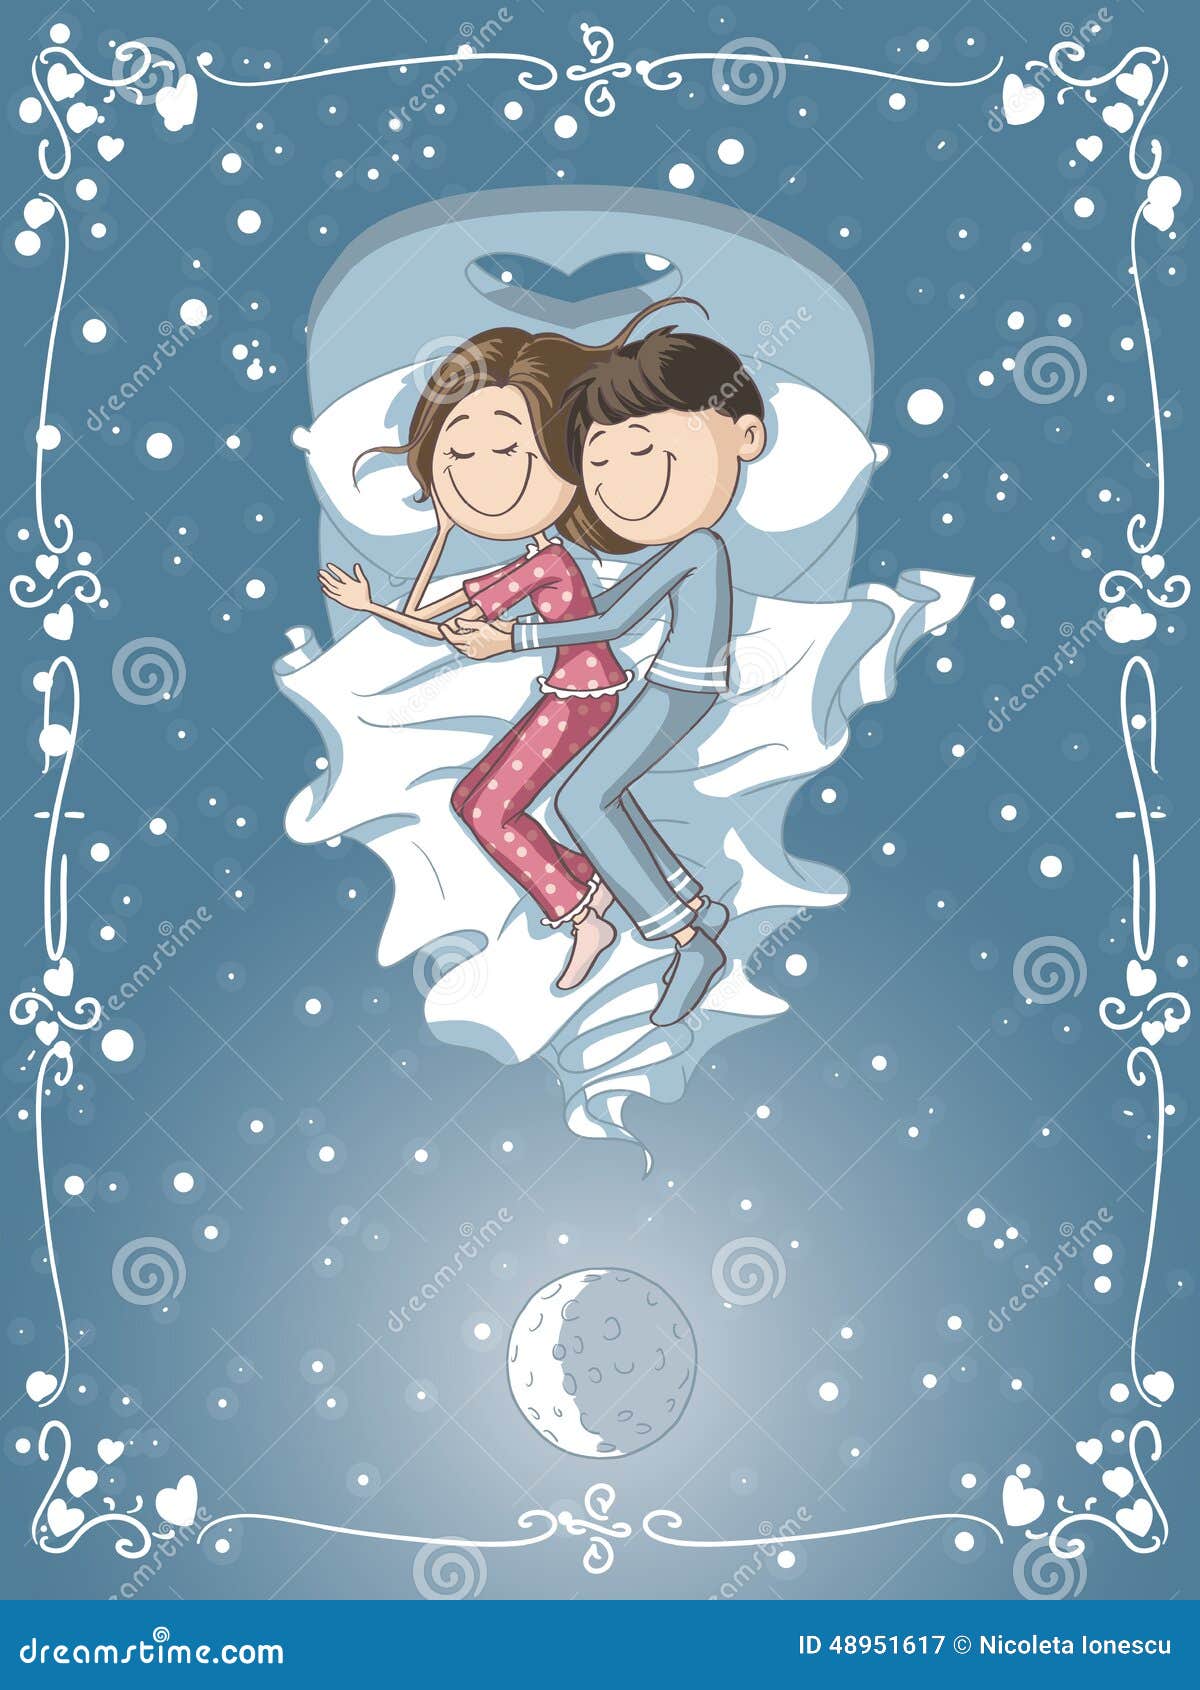 Cute Cartoon Couple Cuddles In Bed Stock Vector - Image: 48951617